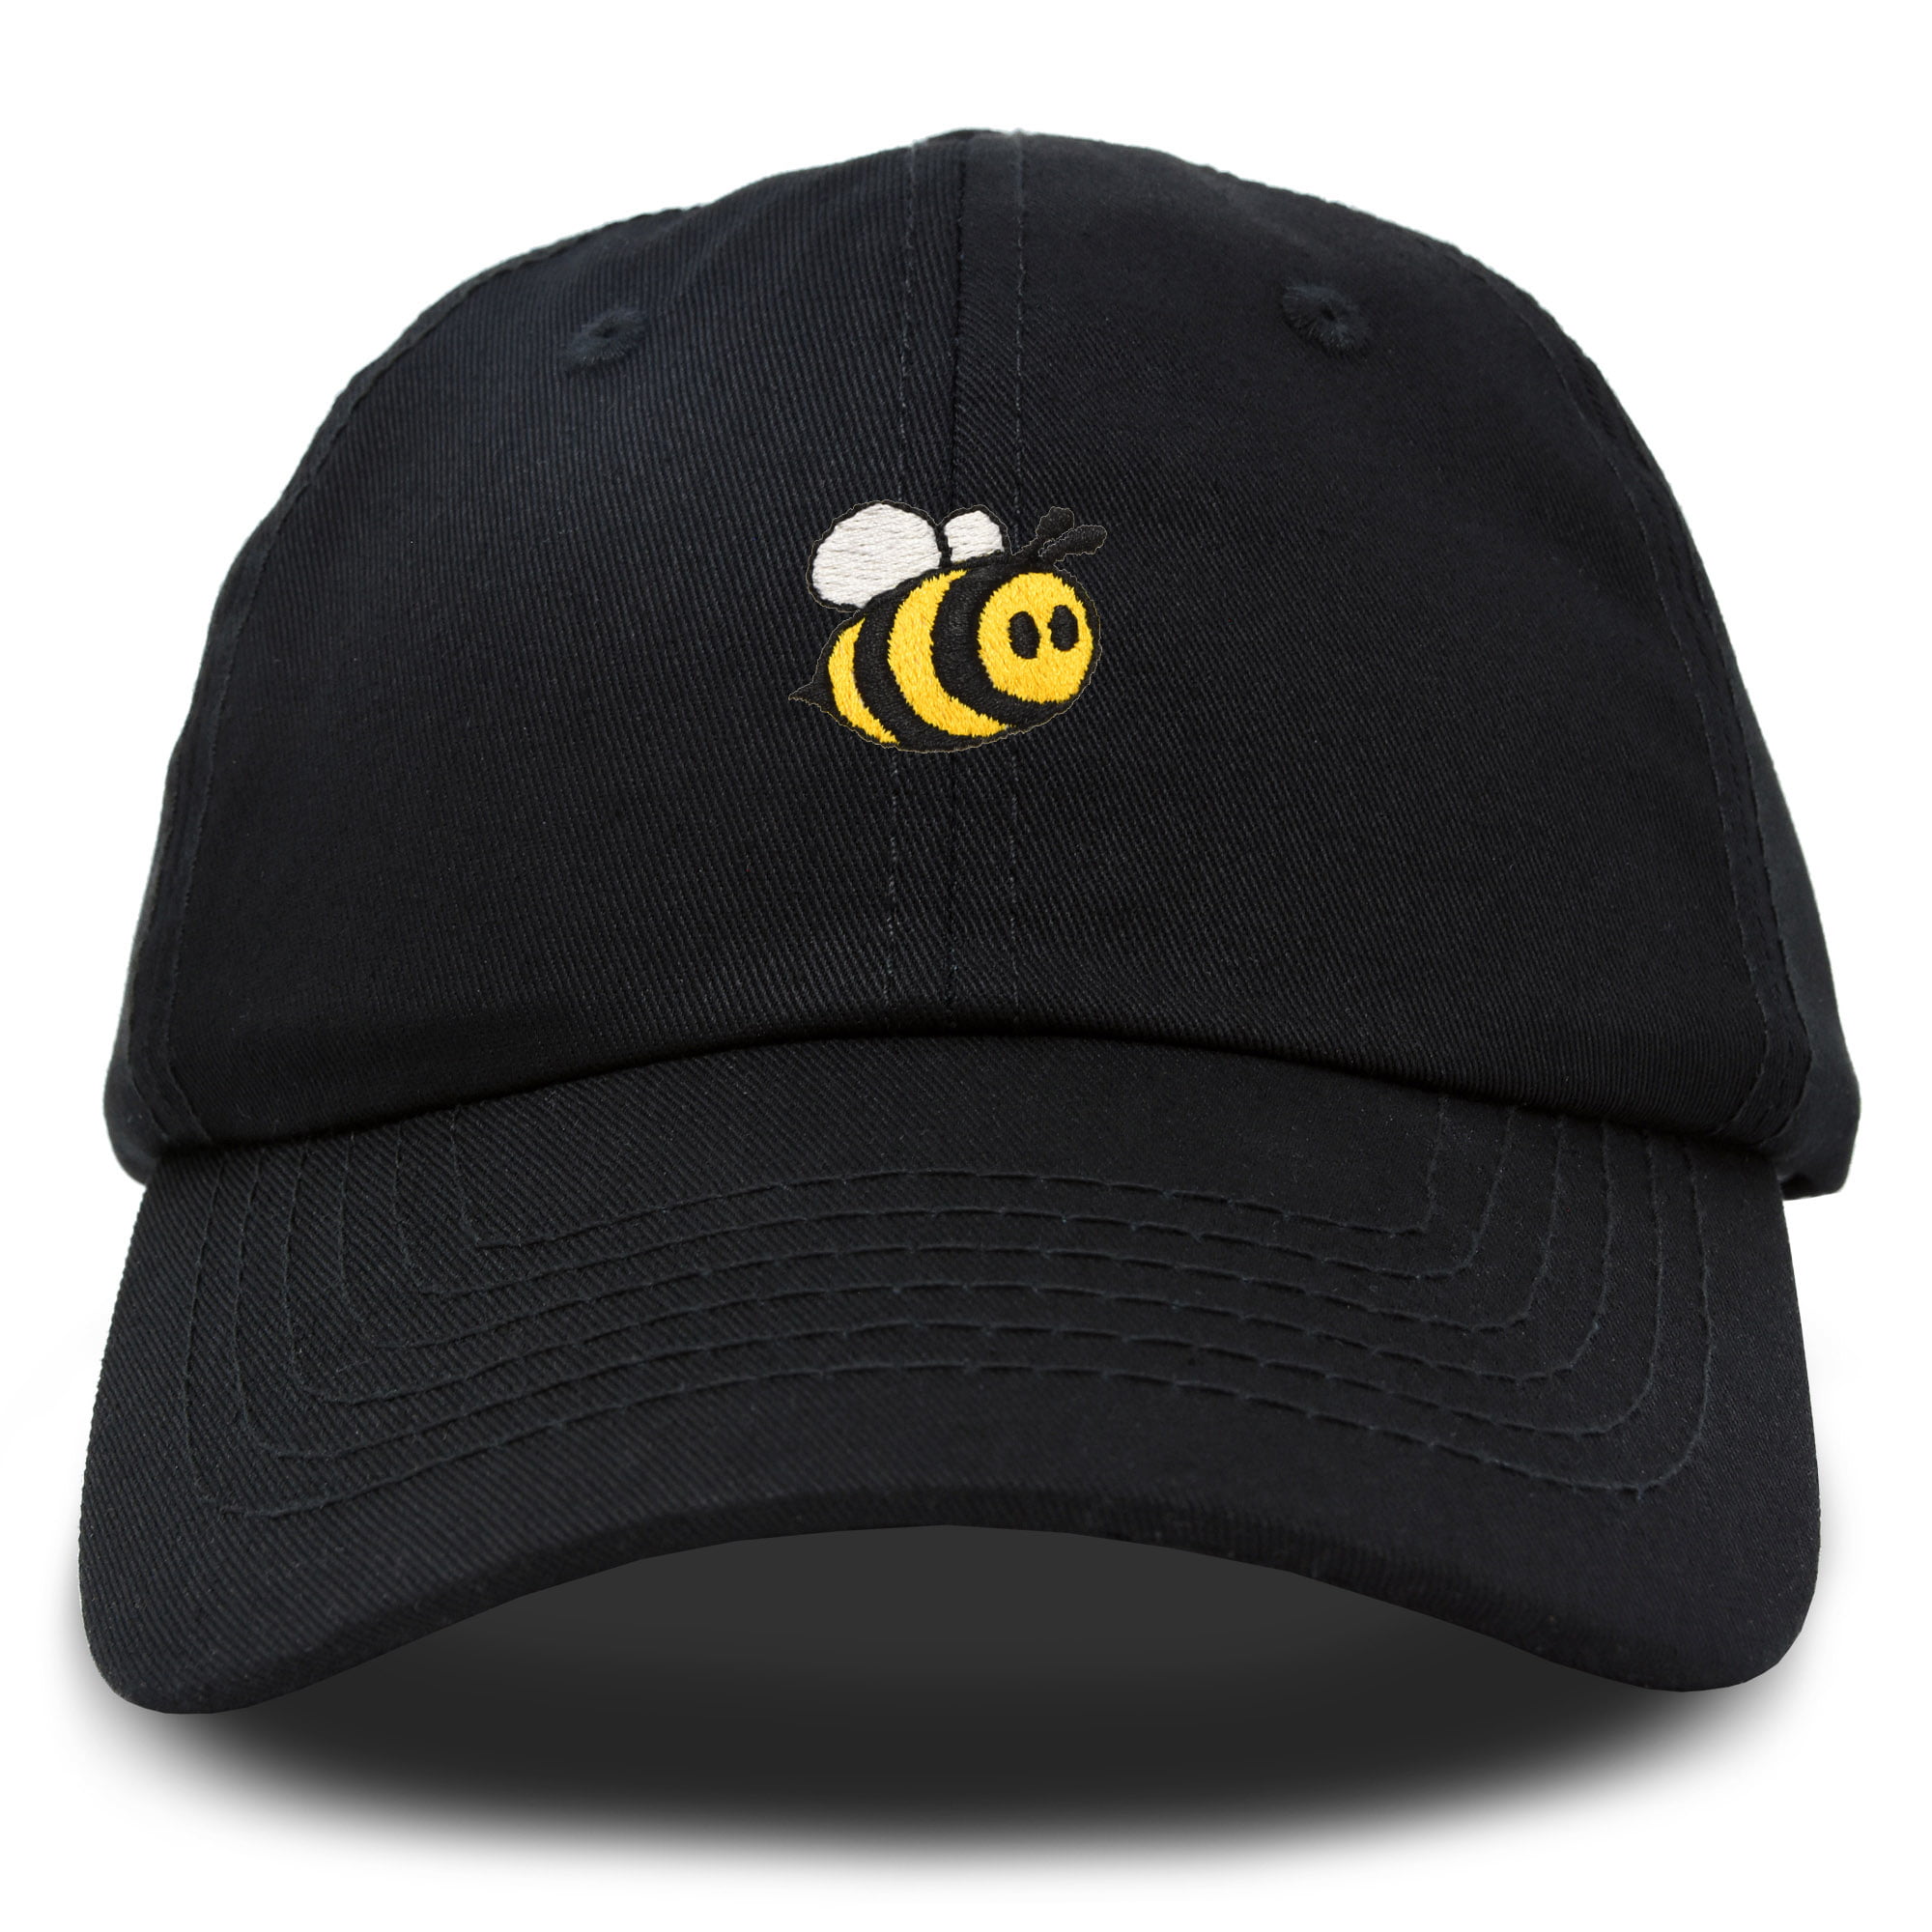 DALIX Bumble Bee Baseball Cap Dad Hat Embroidered Womens Girls in Black ...